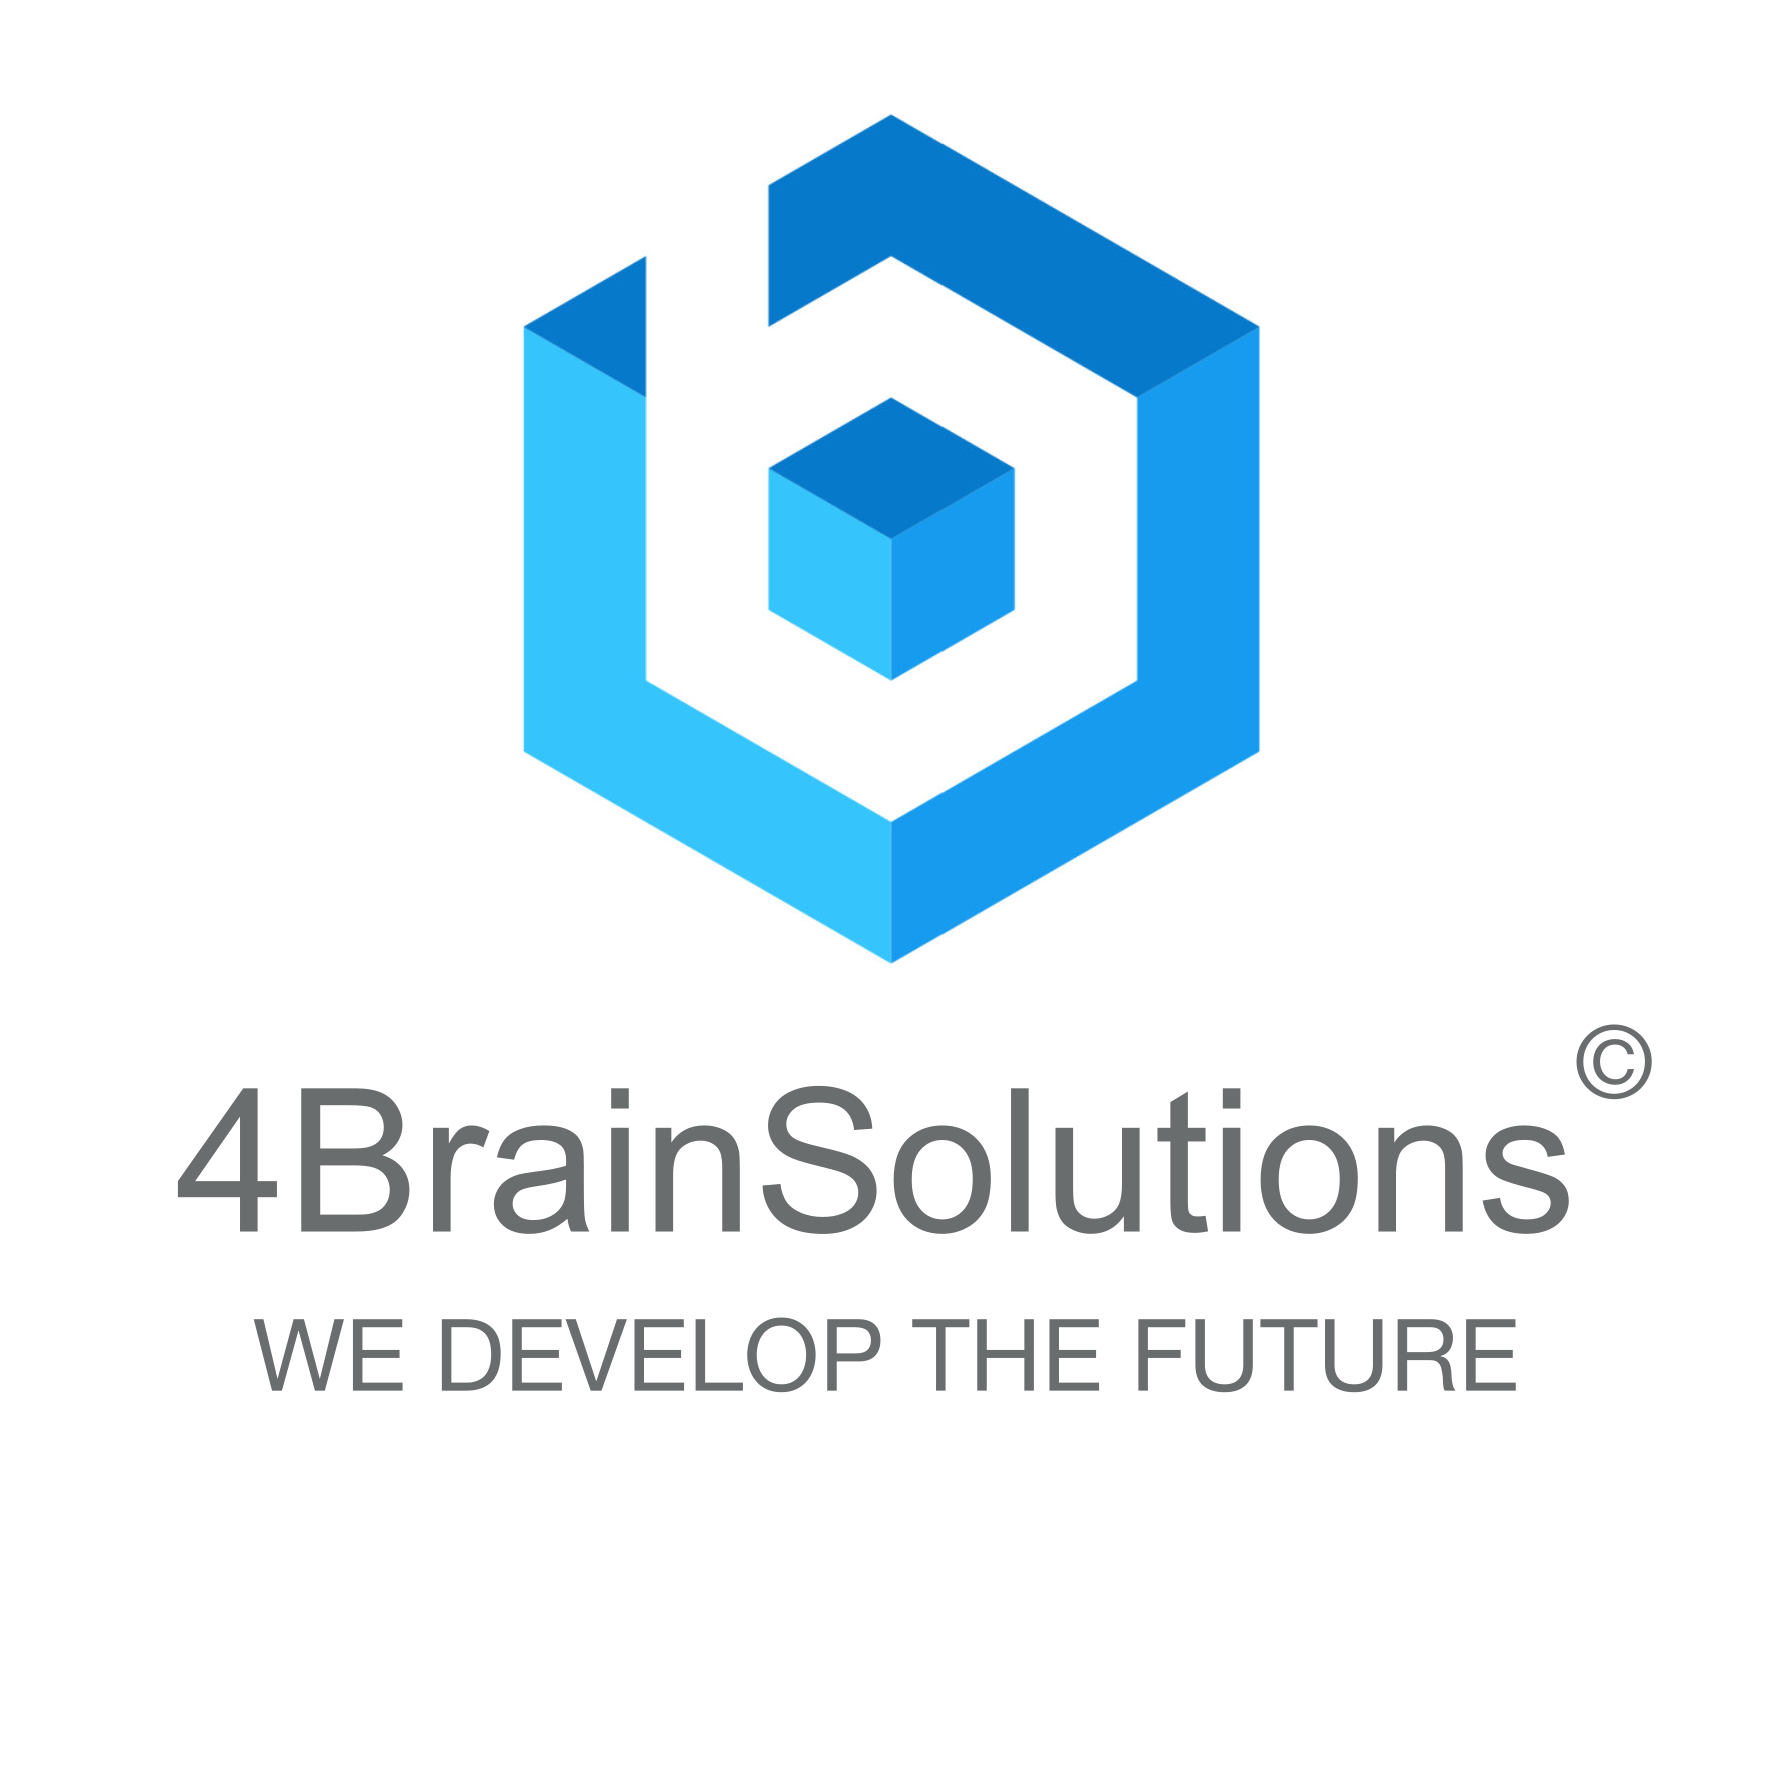 4BrainSolutions